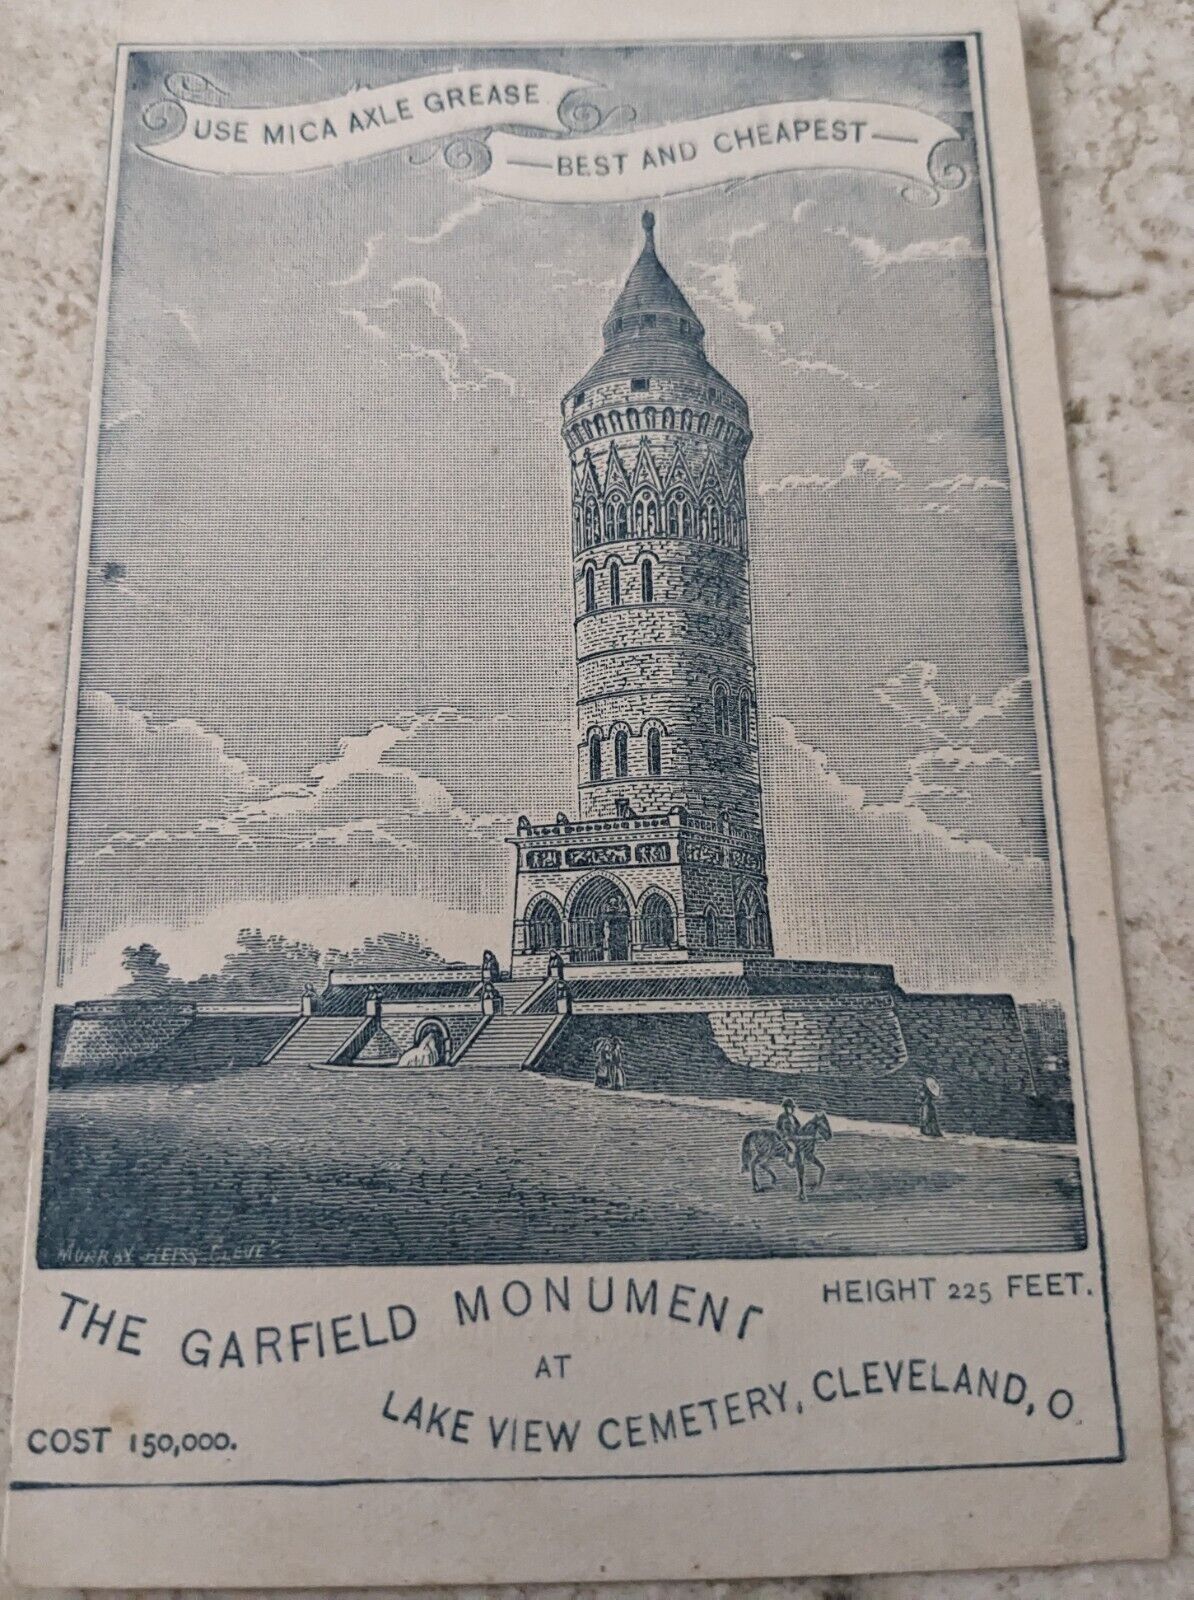 *RARE* TRADE CARD THE GARFIELD MONUMENT MICA AXLE GREASE C.W COMINS CHAUMONT, NY